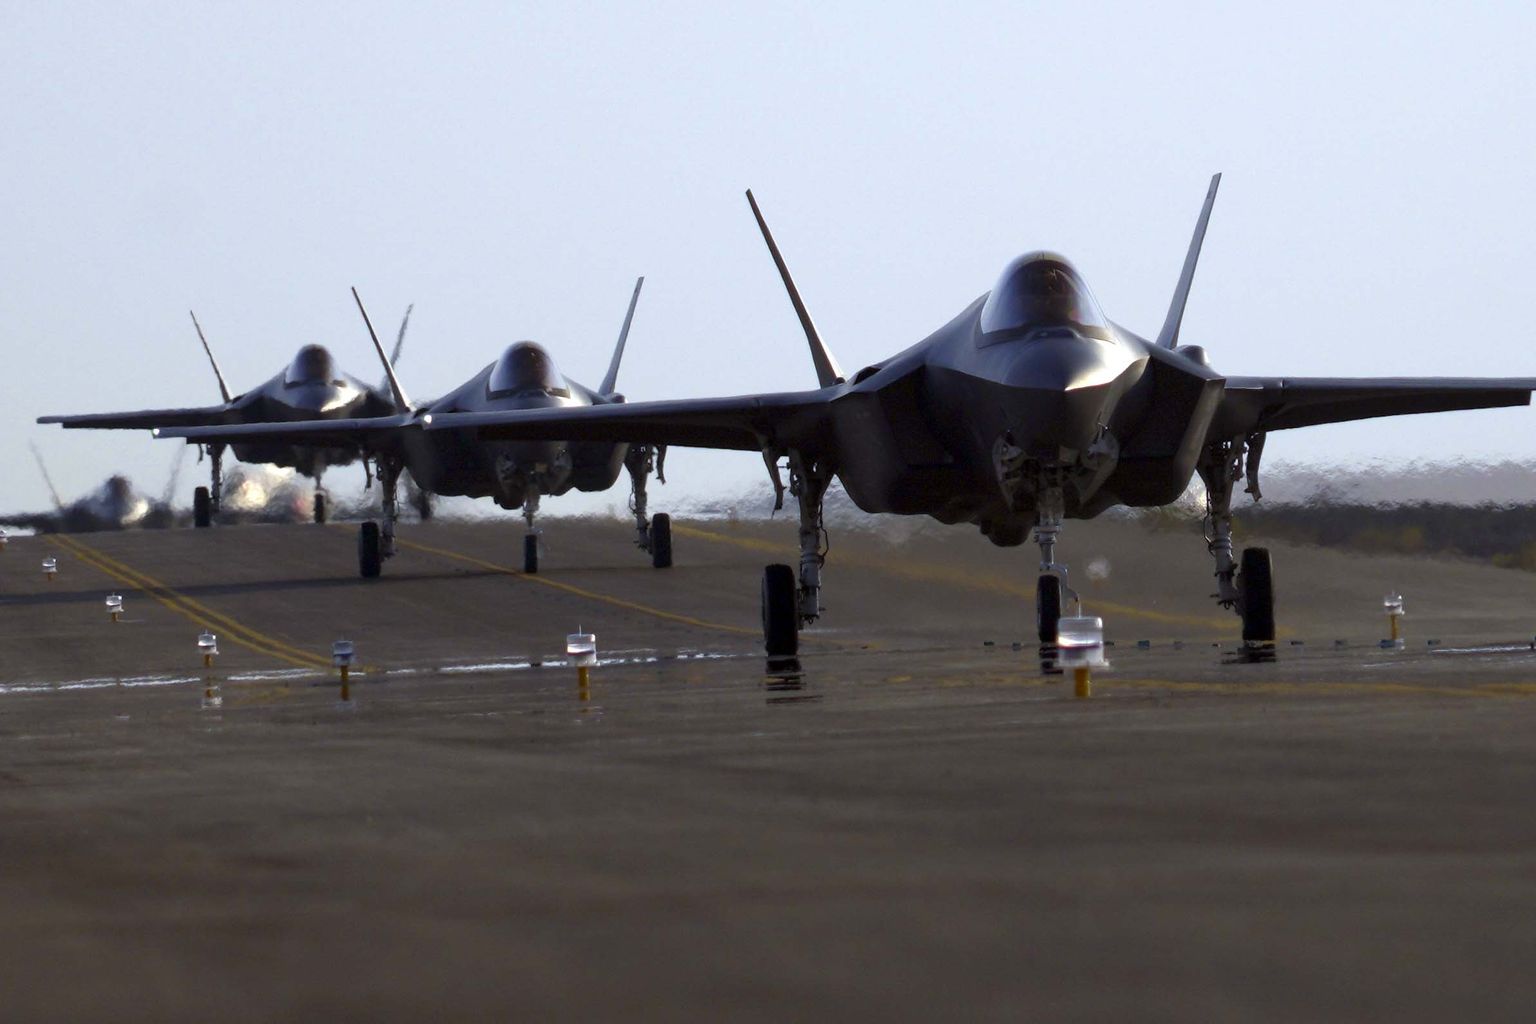 U.S. Air Force F-35A Lightning II’s from Hill Air Force Base returned to Al Dhafra Air Base, United Arab Emirates, to rejoin the 380th Air Expeditionary Wing on Nov. 16, 2019 for their second combat deployment.  The F-35 is a stealth, 5th generation fighter, multirole combat aircraft designed for ground attack and air superiority missions. (U.S. Air Force photo by Tech. Sgt. Joshua Williams)